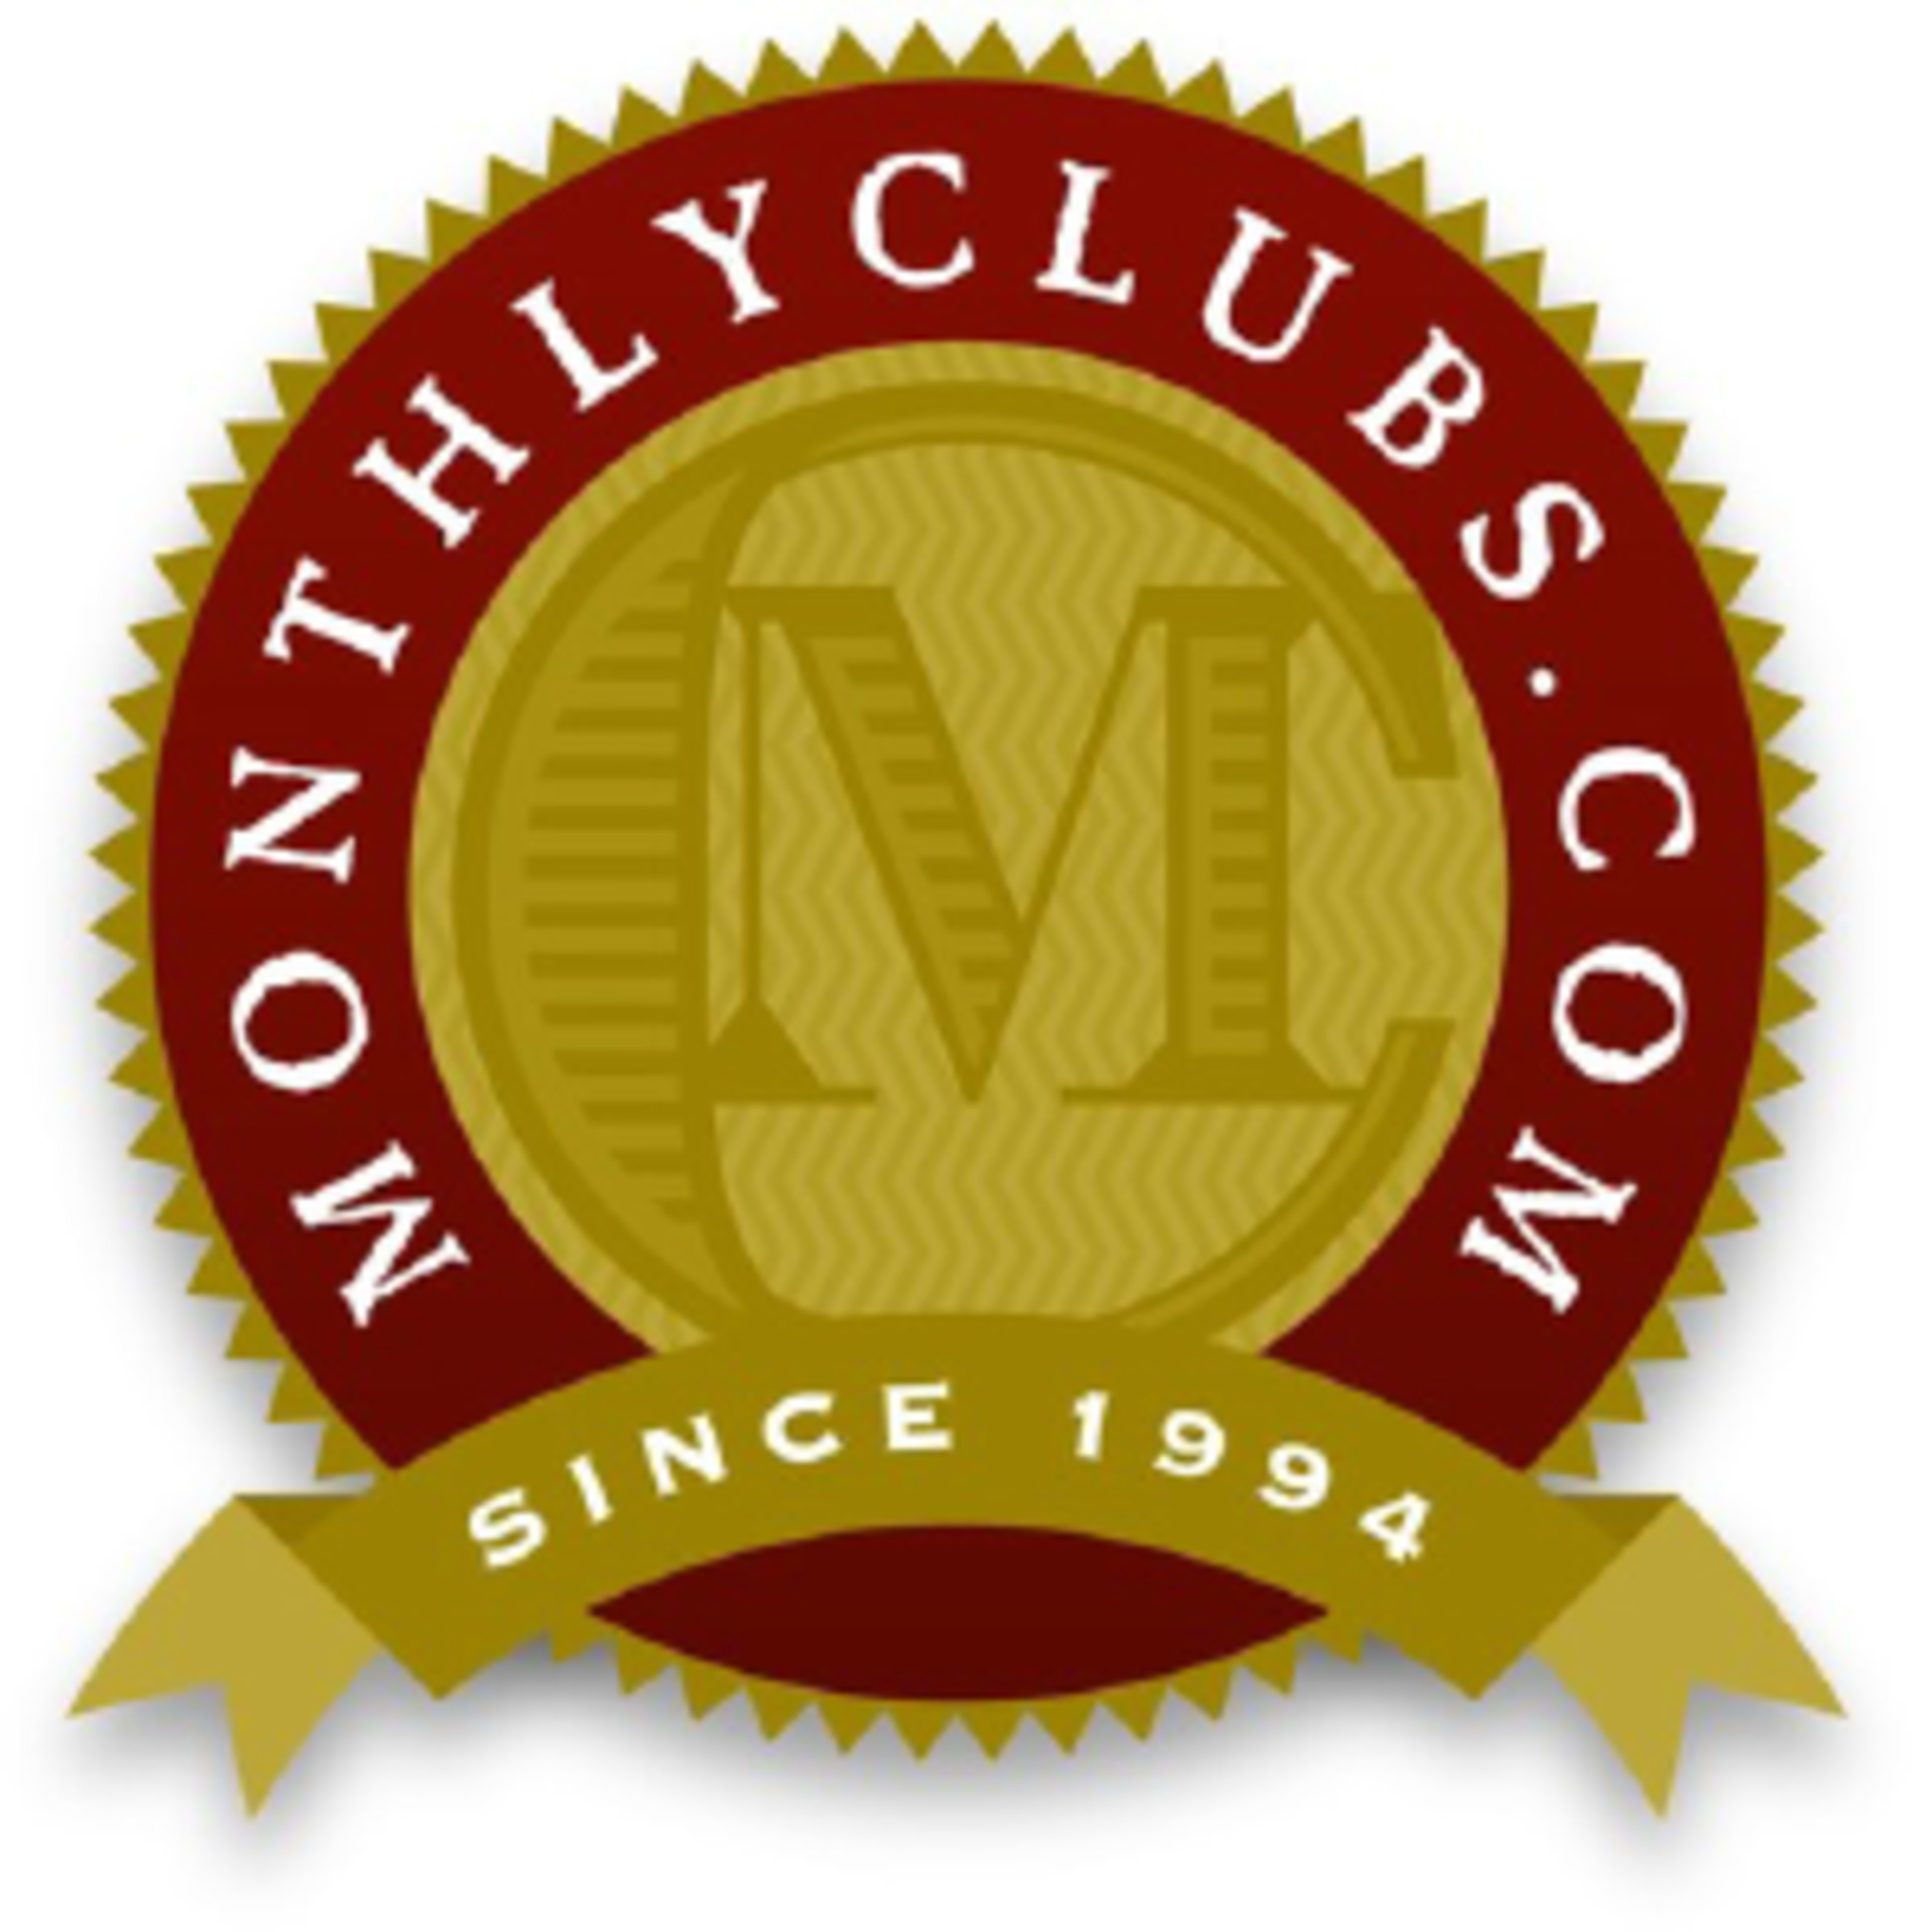 Monthly Clubs Code